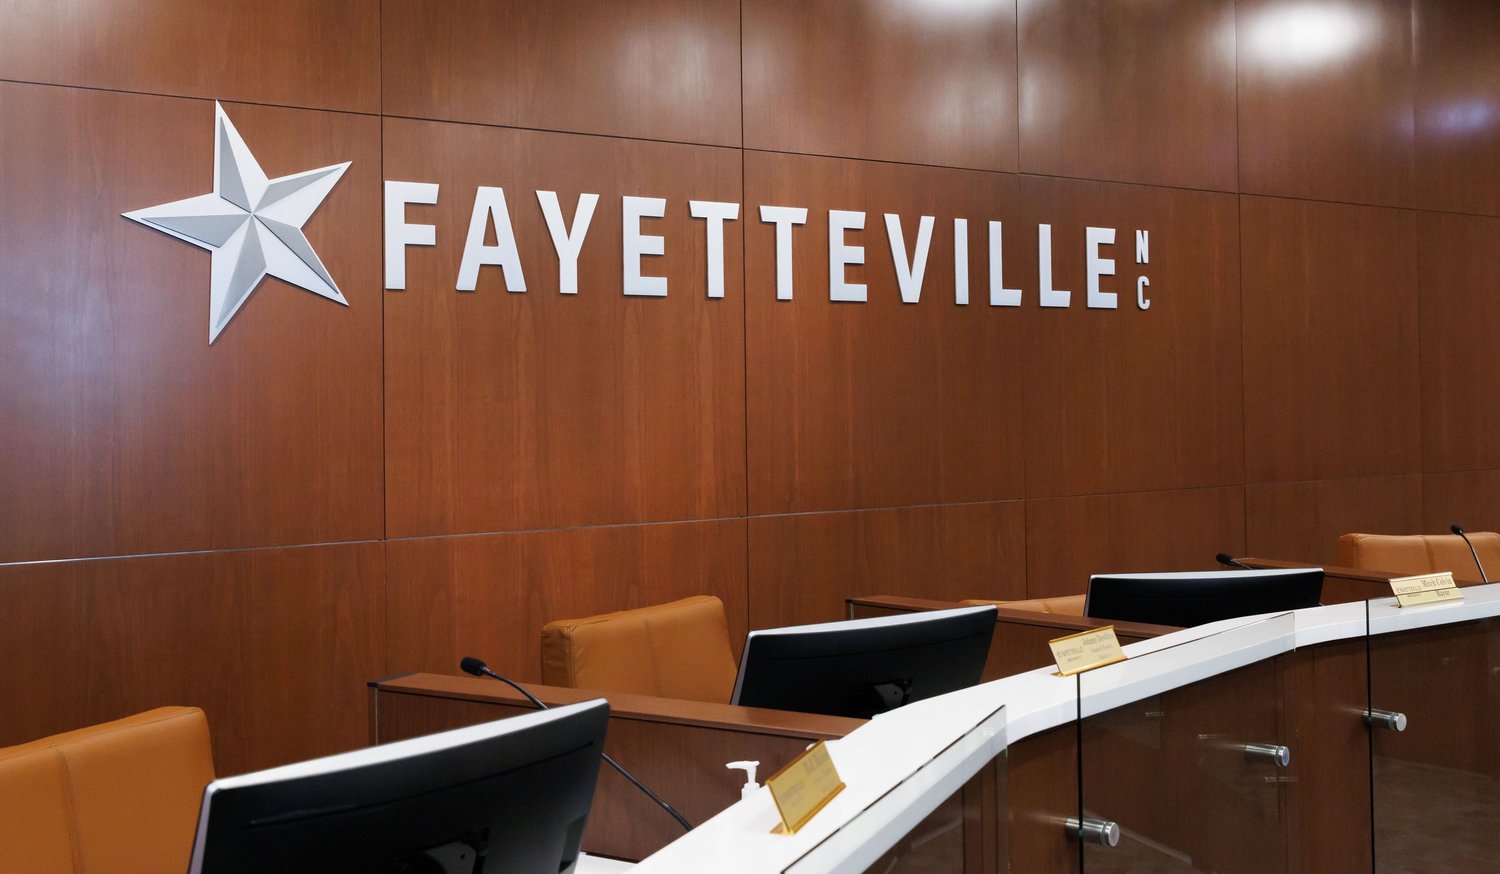 The Fayetteville City Council amended its policy on signing up for public comment.